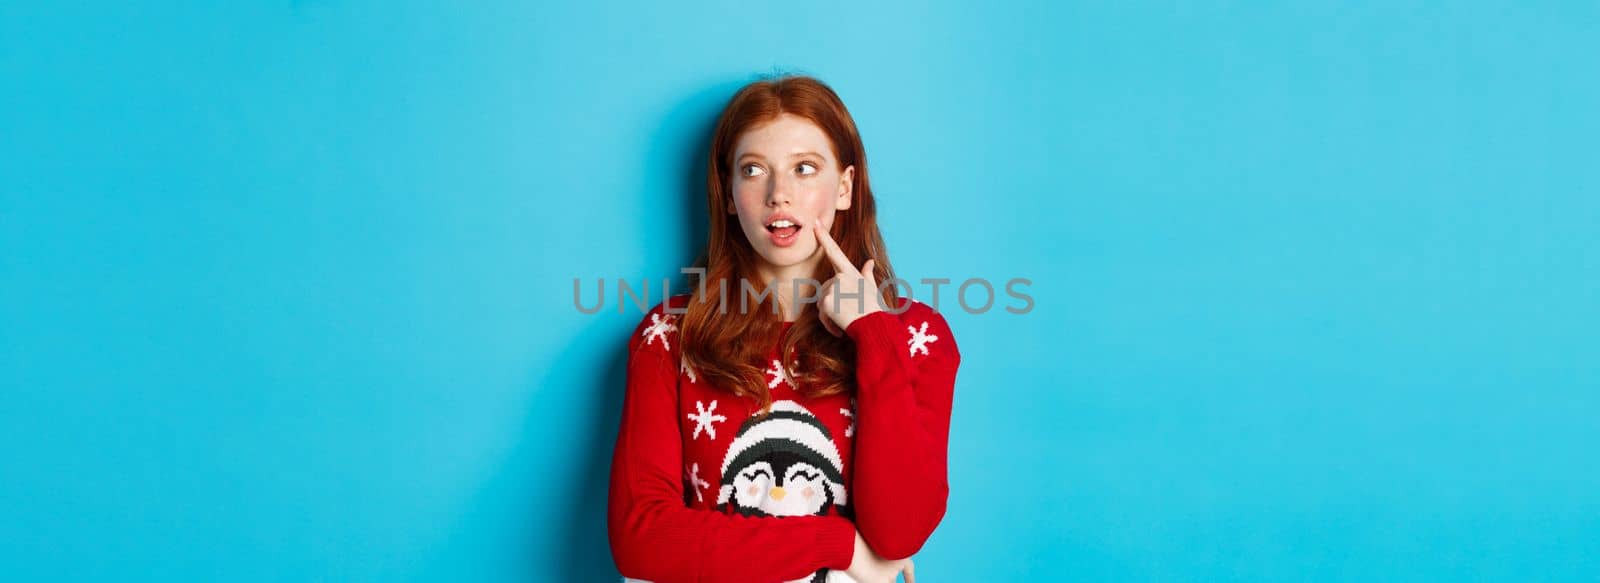 Winter holidays and Christmas Eve concept. Pretty redhead girl in xmas sweater, touching cheek thoughtful and smiling, making choice, looking at upper right corner and thinking, blue background.